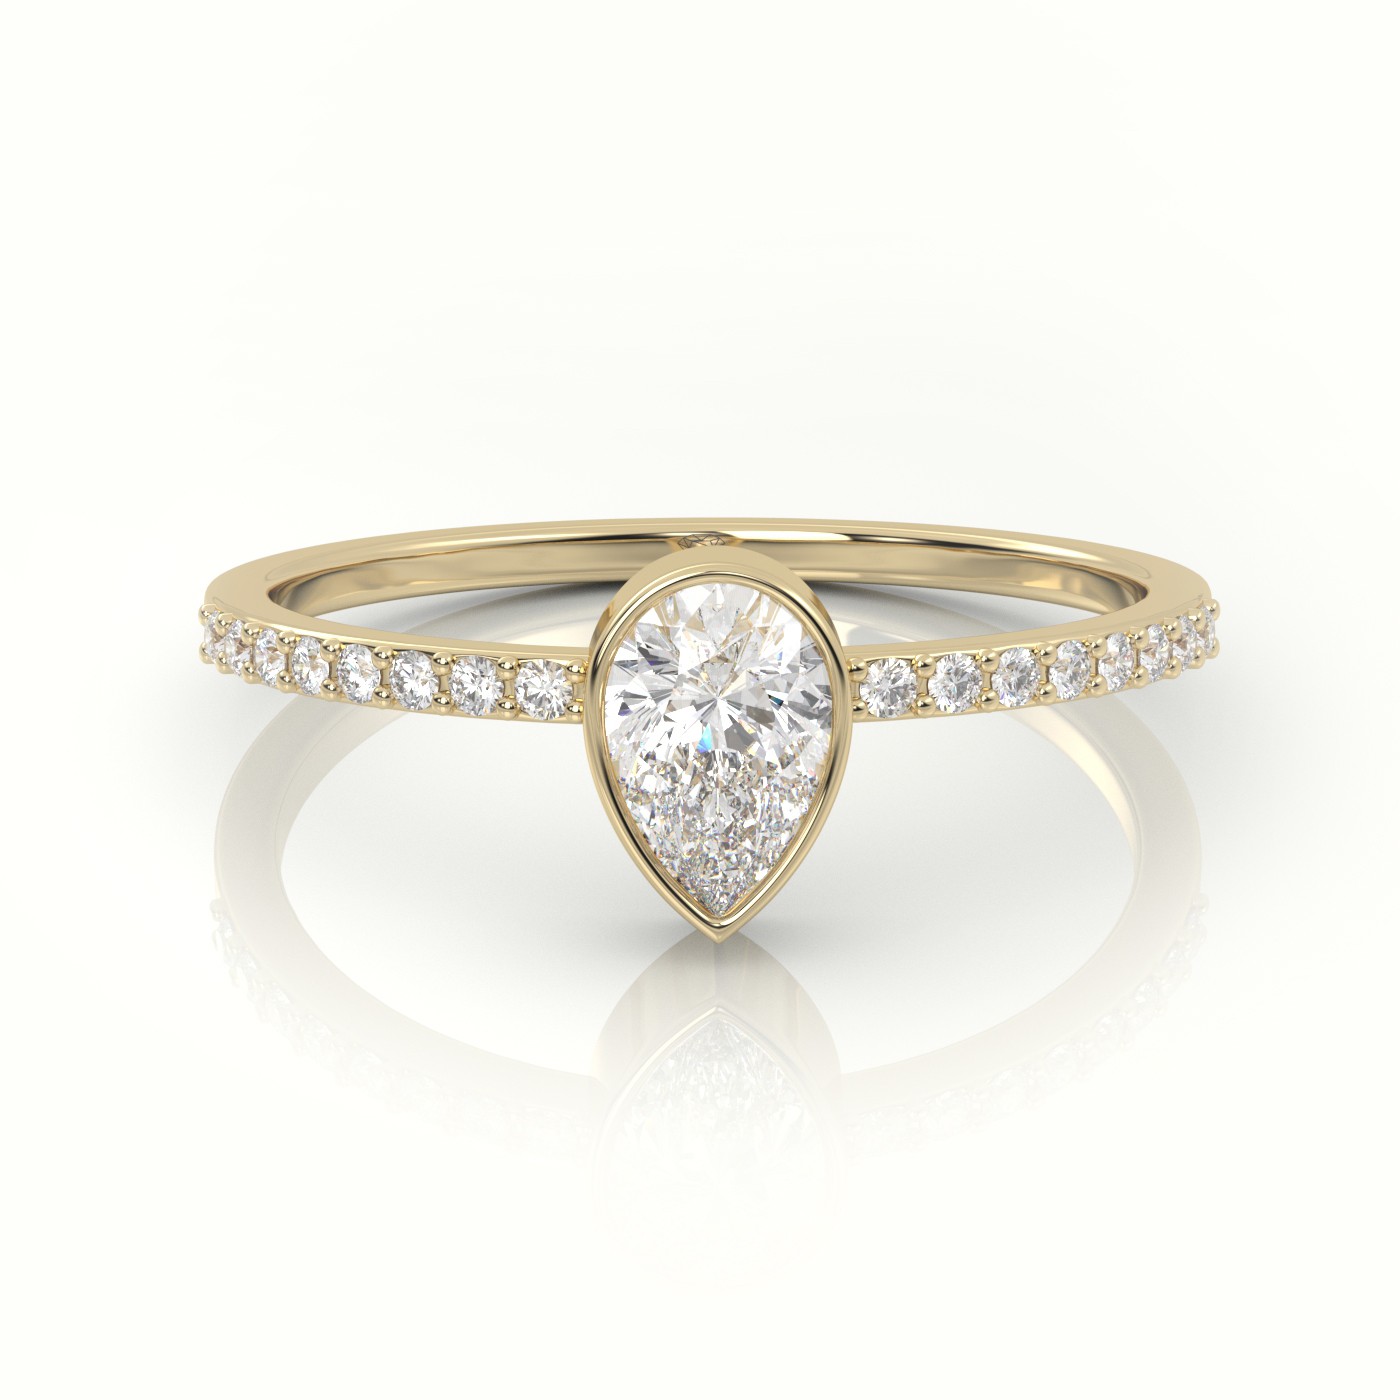 18K YELLOW GOLD PEAR CUT DIAMOND CHANNEL SETTING ENGAGEMENT RING